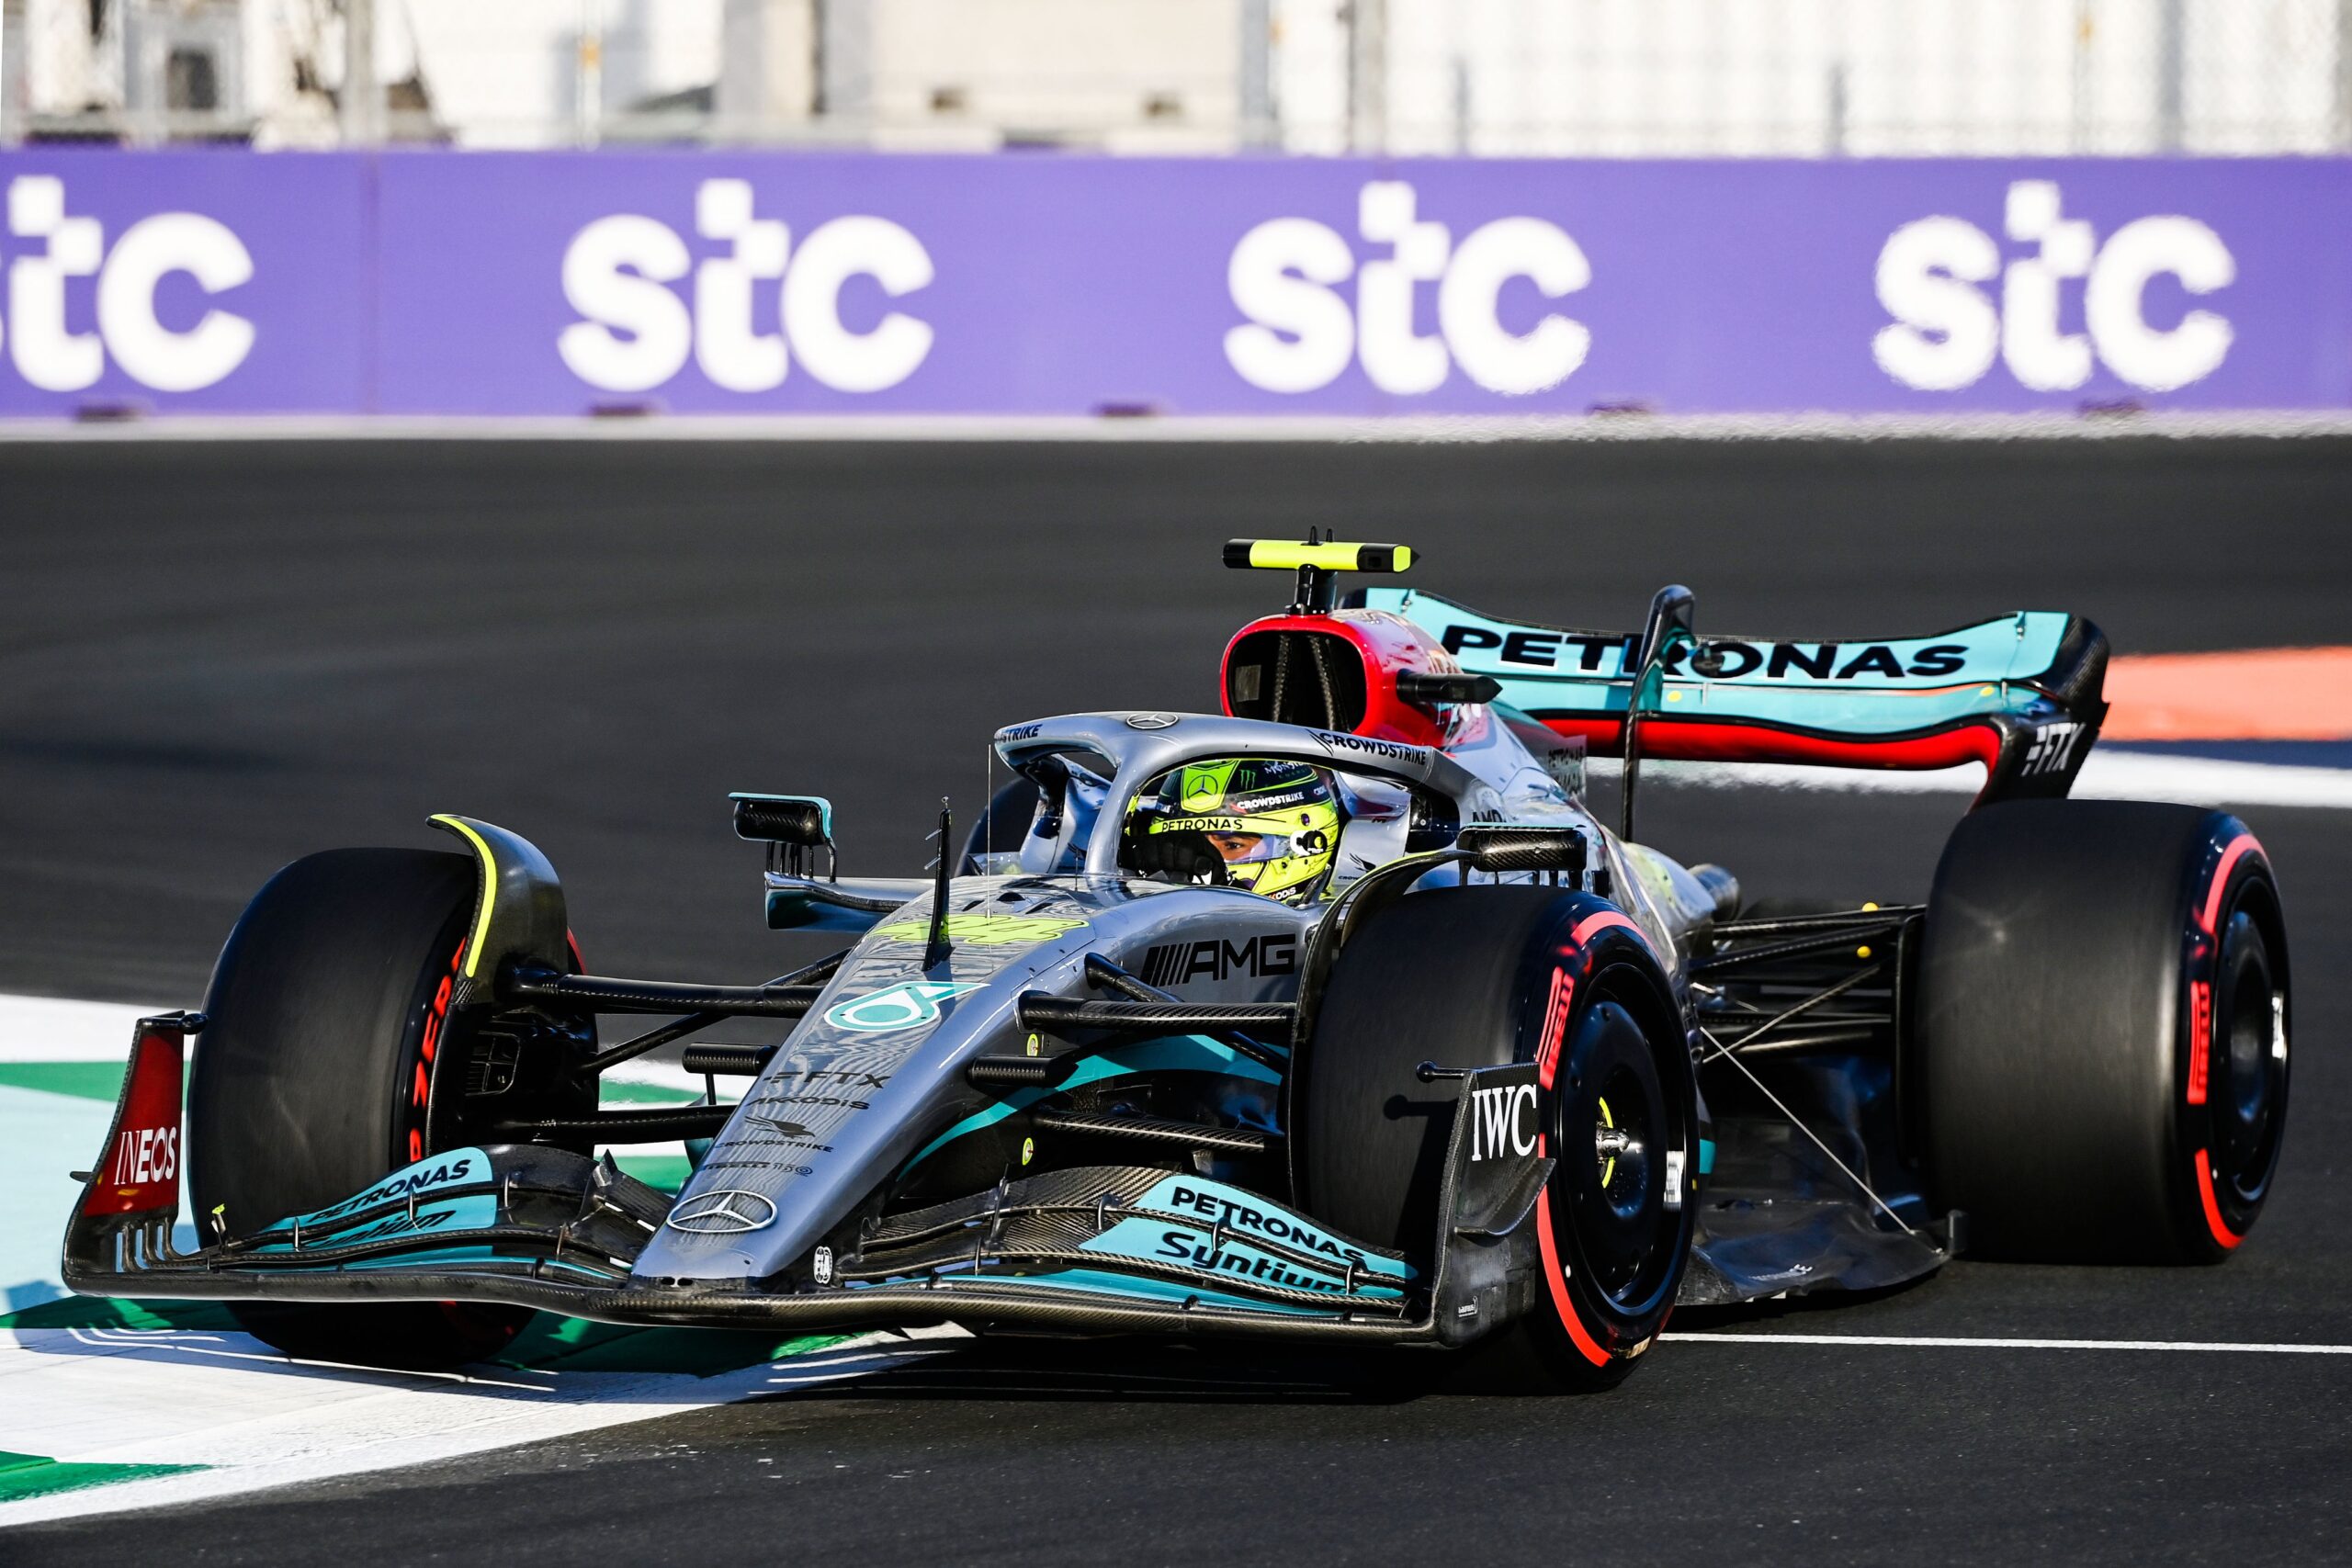 Lewis Hamilton and Mercedes struggle for pace